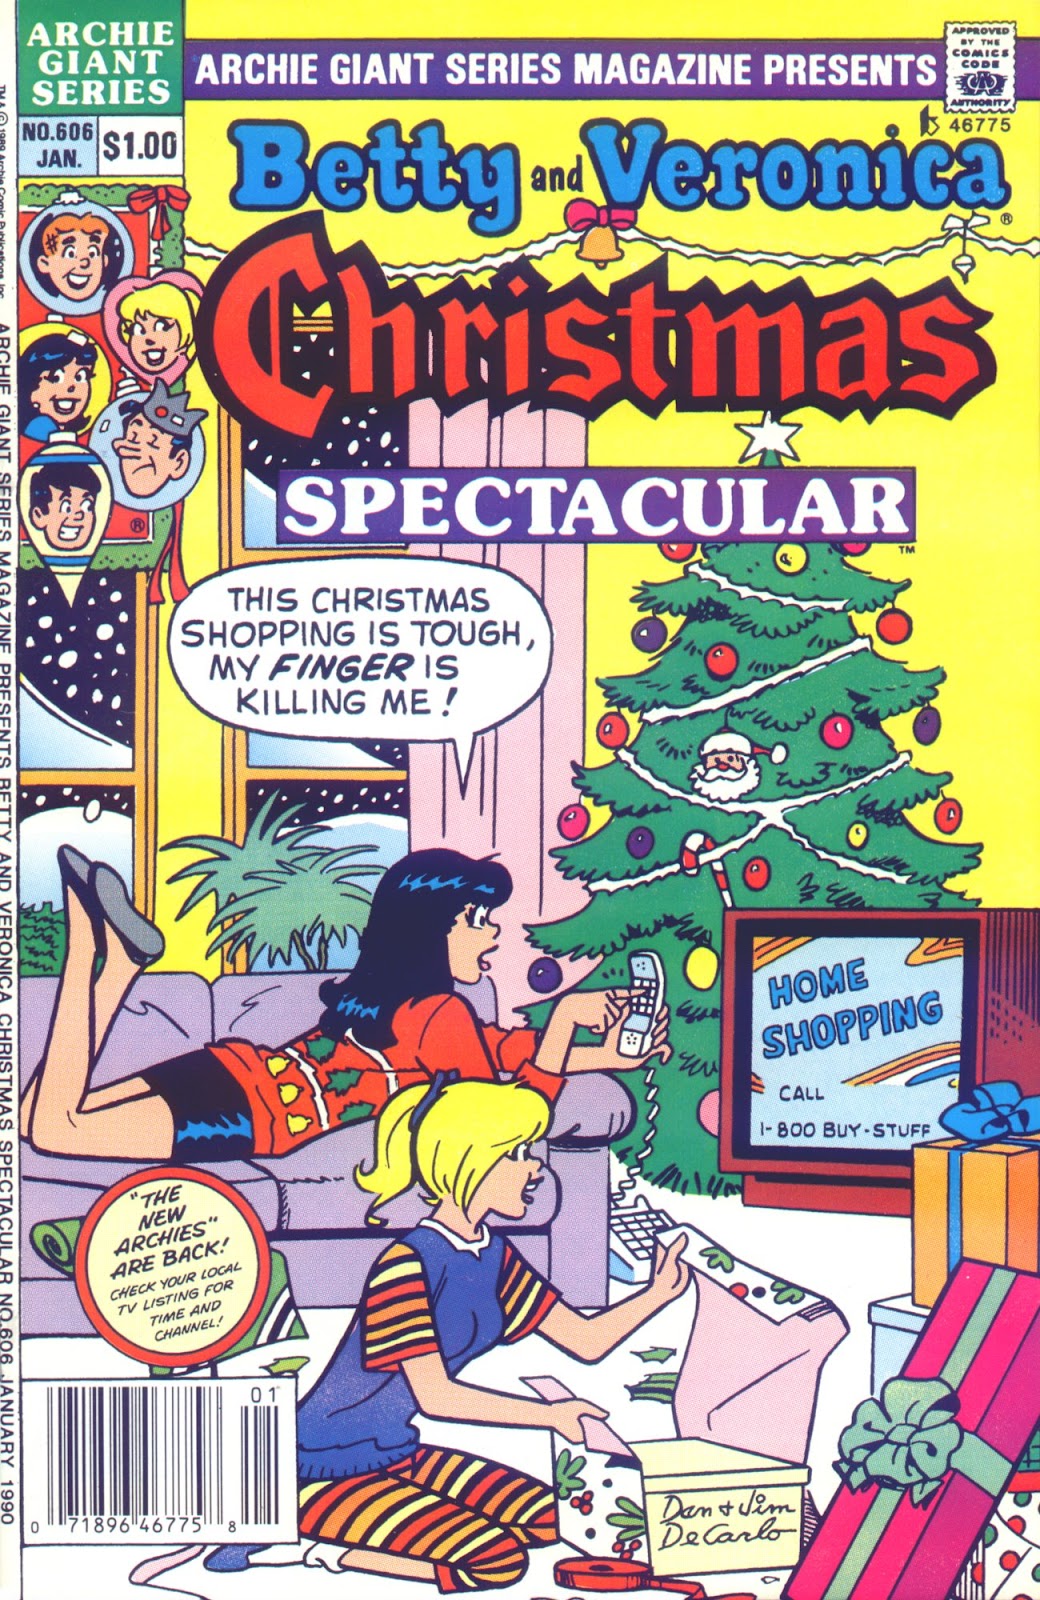 Archie Giant Series Magazine 606 Page 1